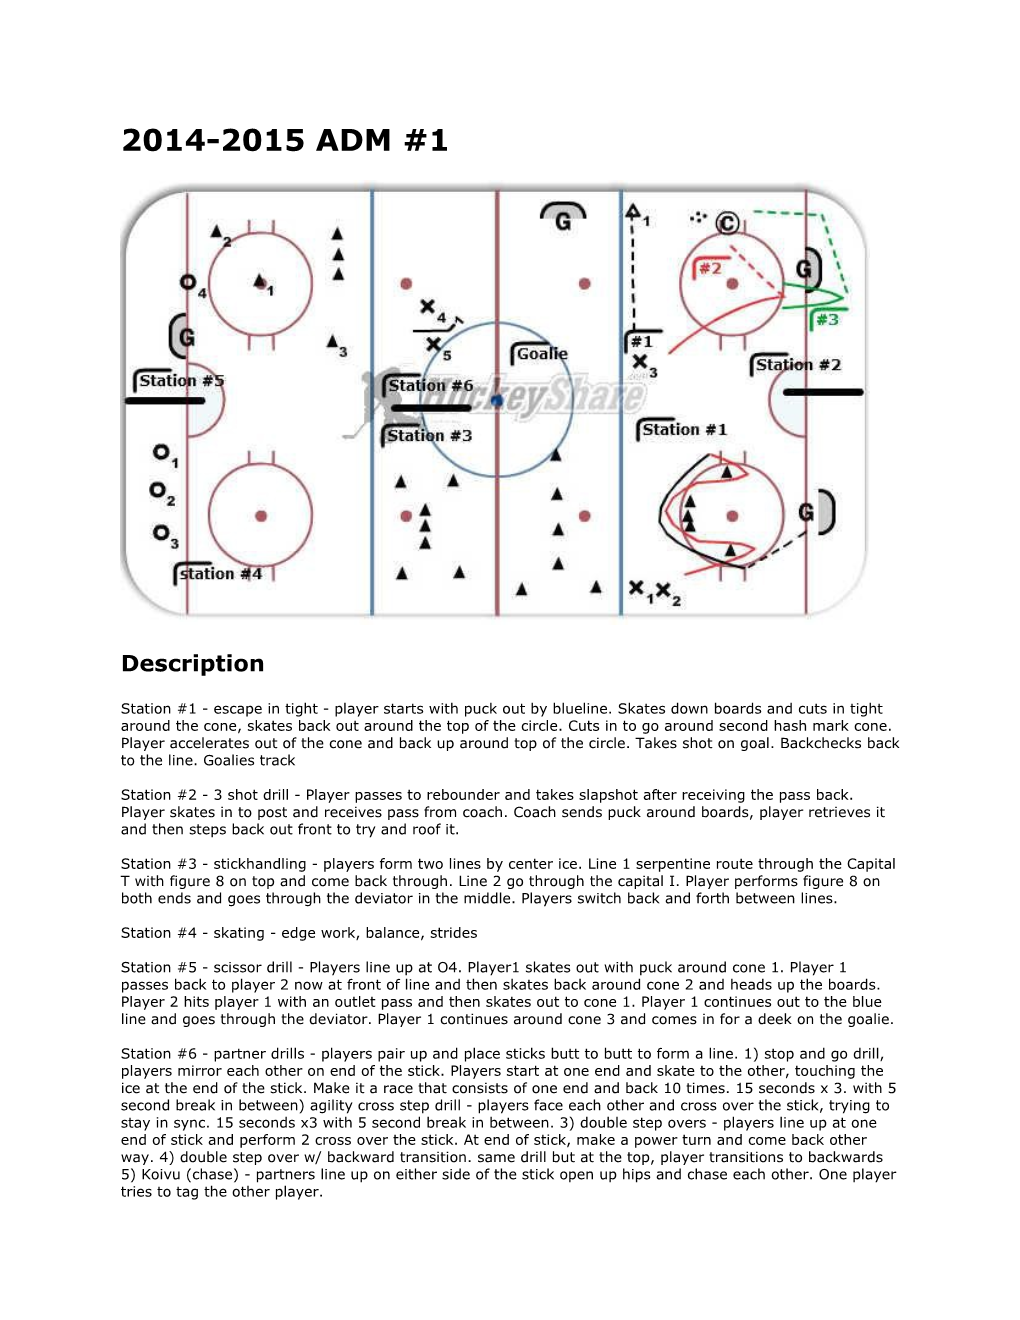 Station #1 - Escape in Tight - Player Starts with Puck out by Blueline. Skates Down Boards